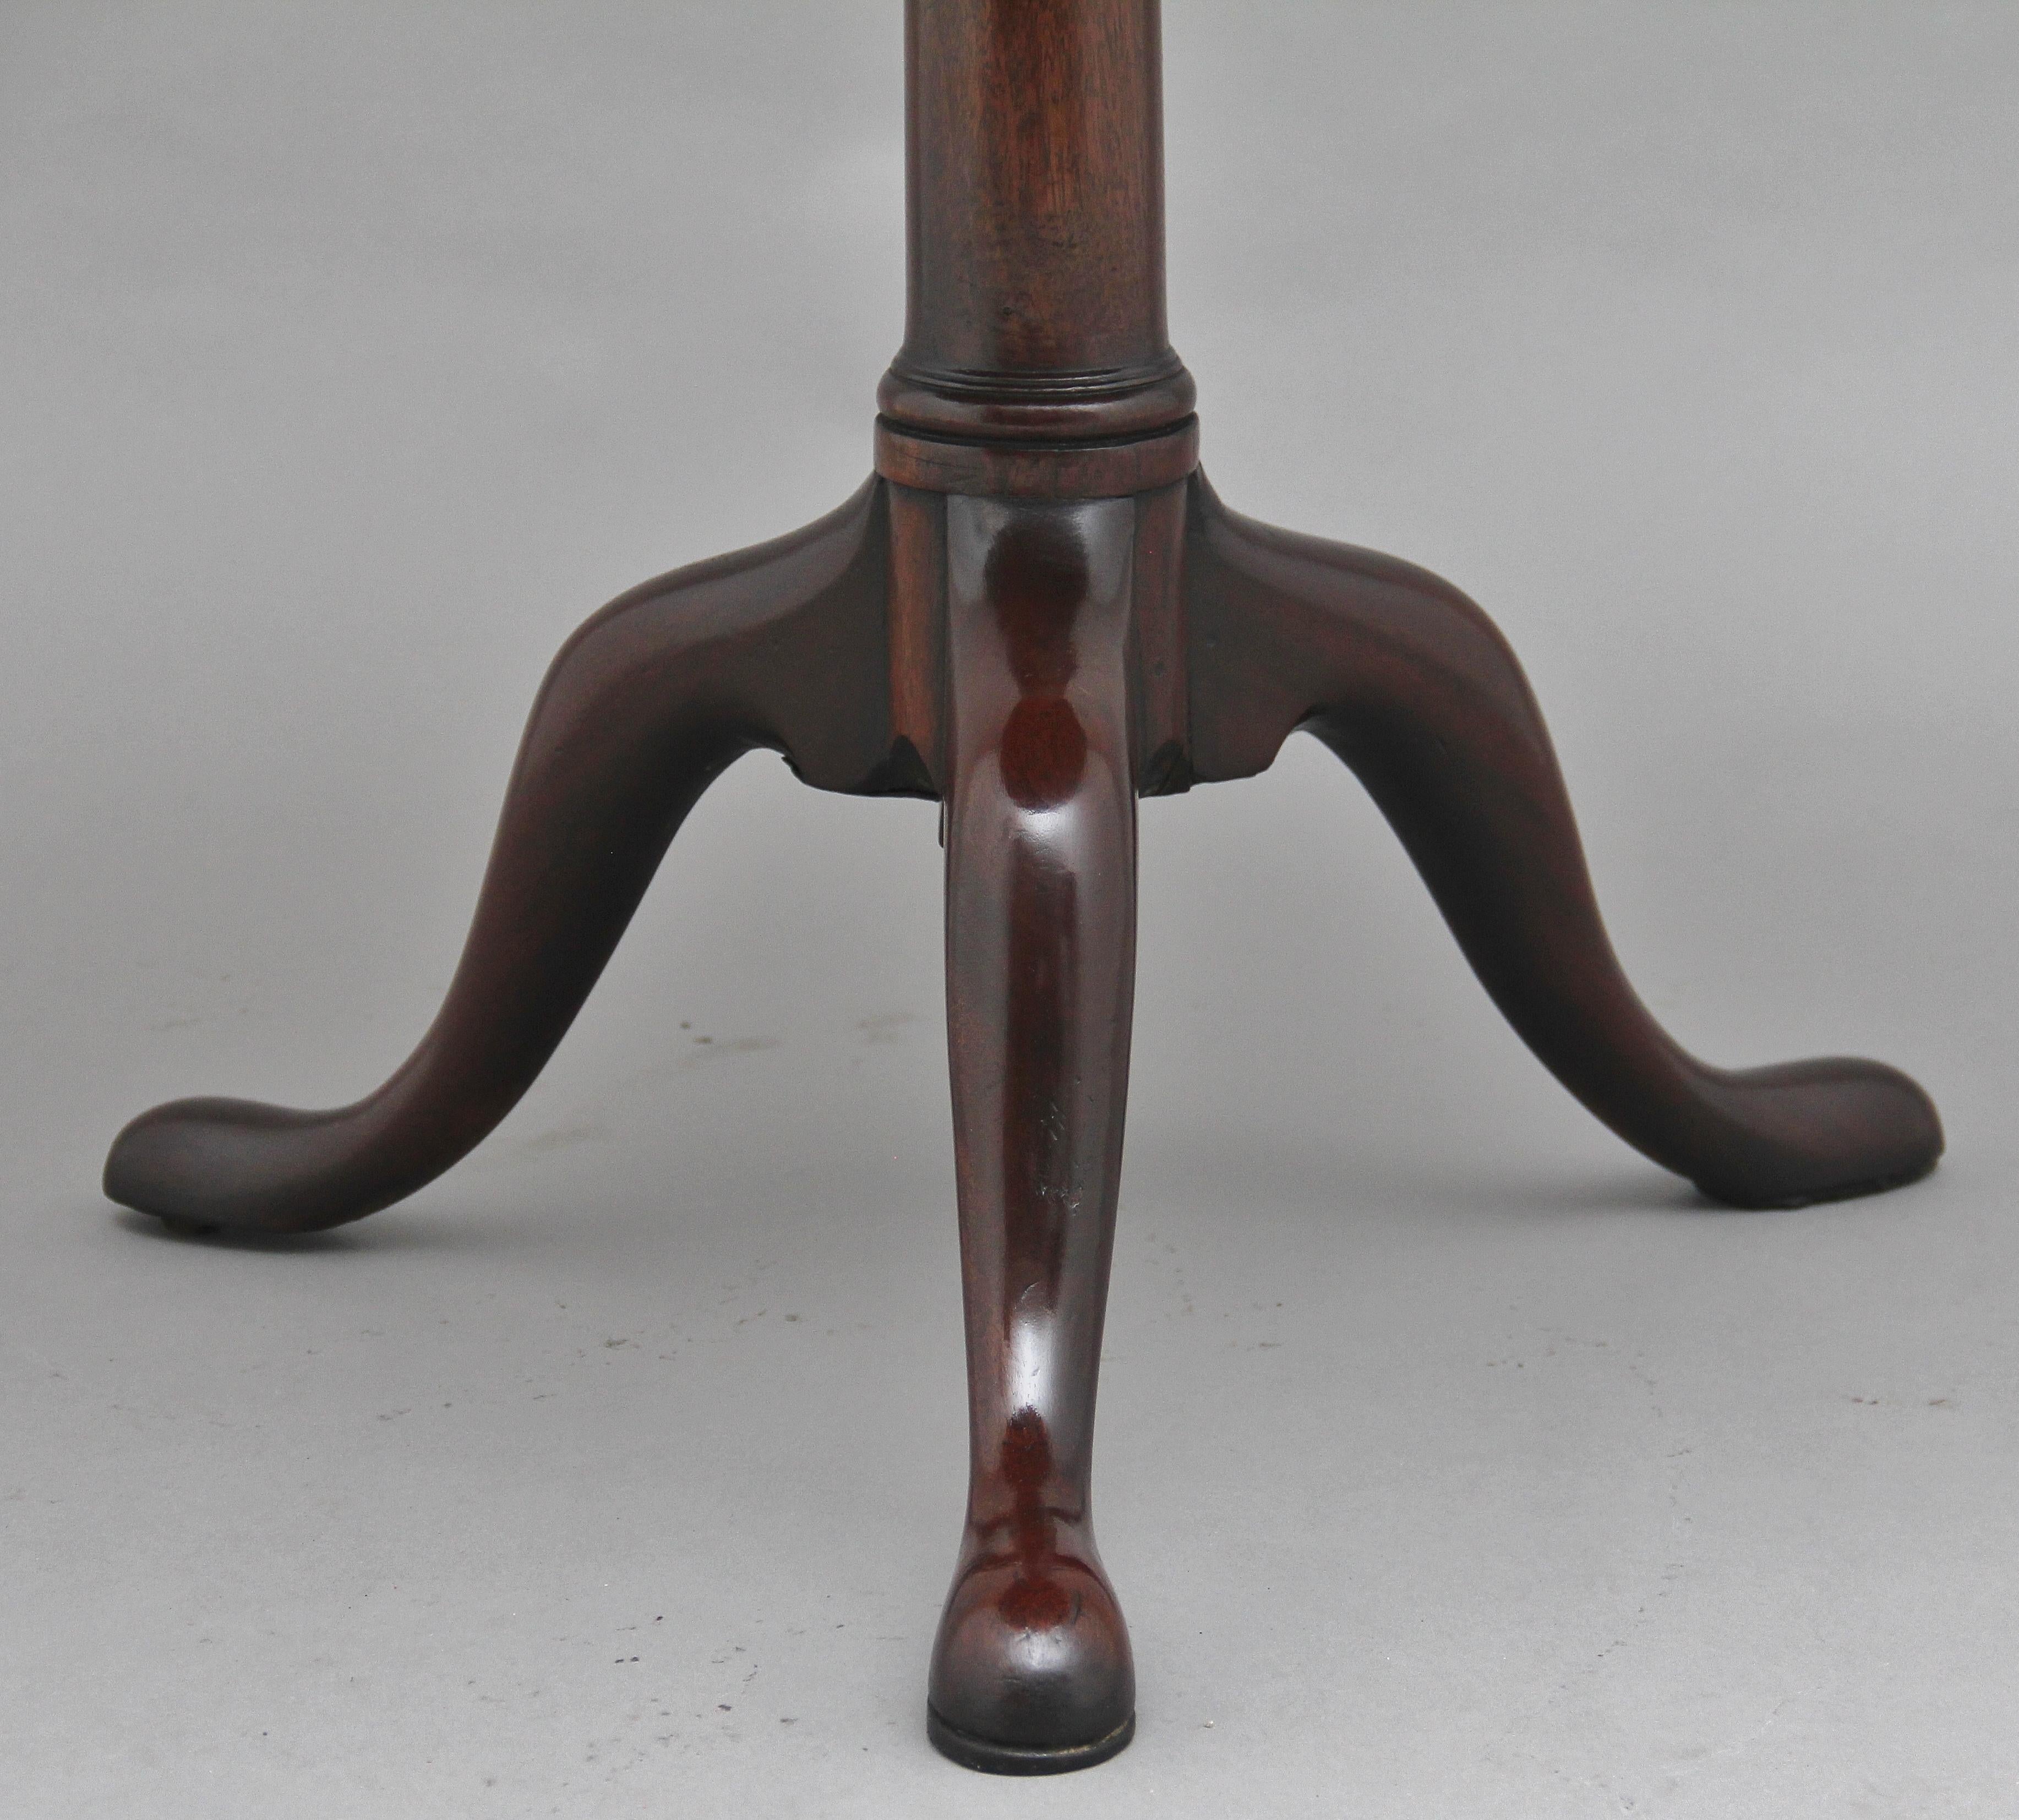 18th Century Mahogany Tripod Table with Decorative Gallery For Sale 2